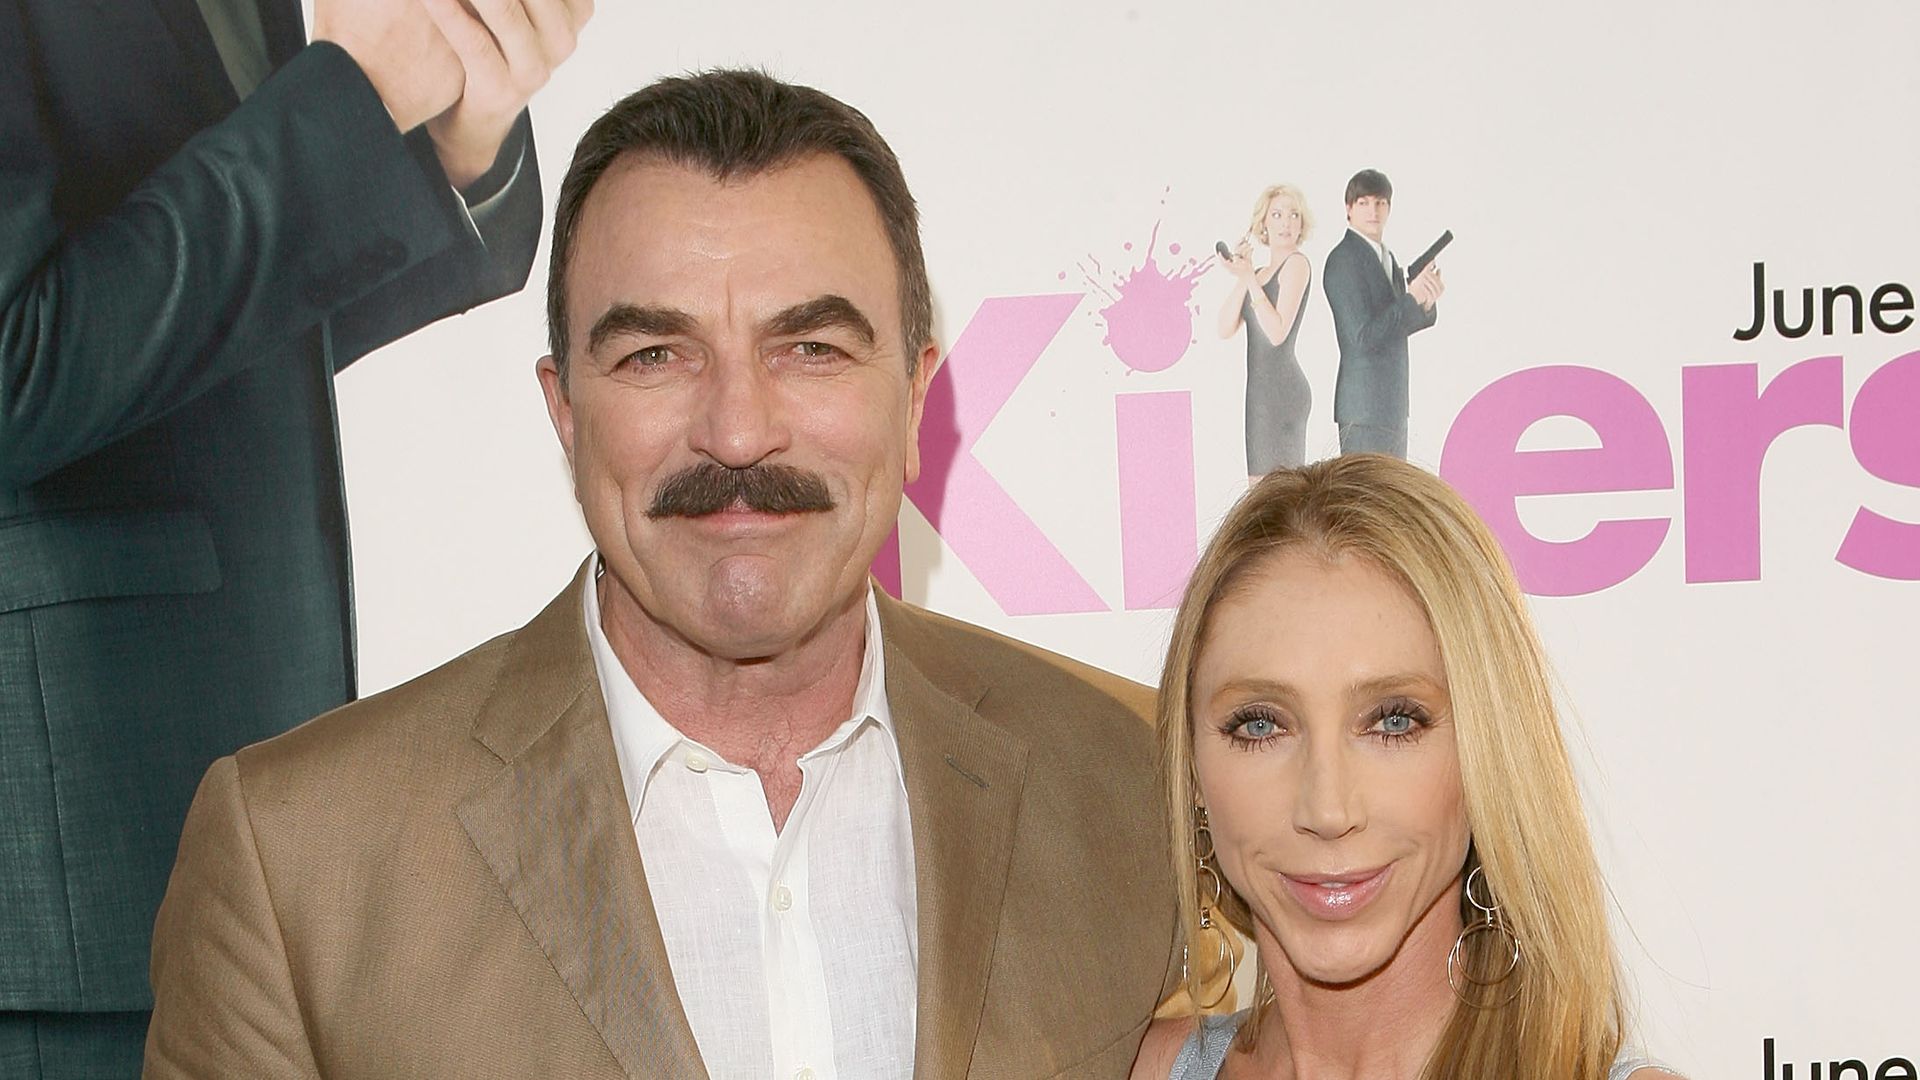 Blue Bloods star Tom Selleck's love story with wife Jillie Mack